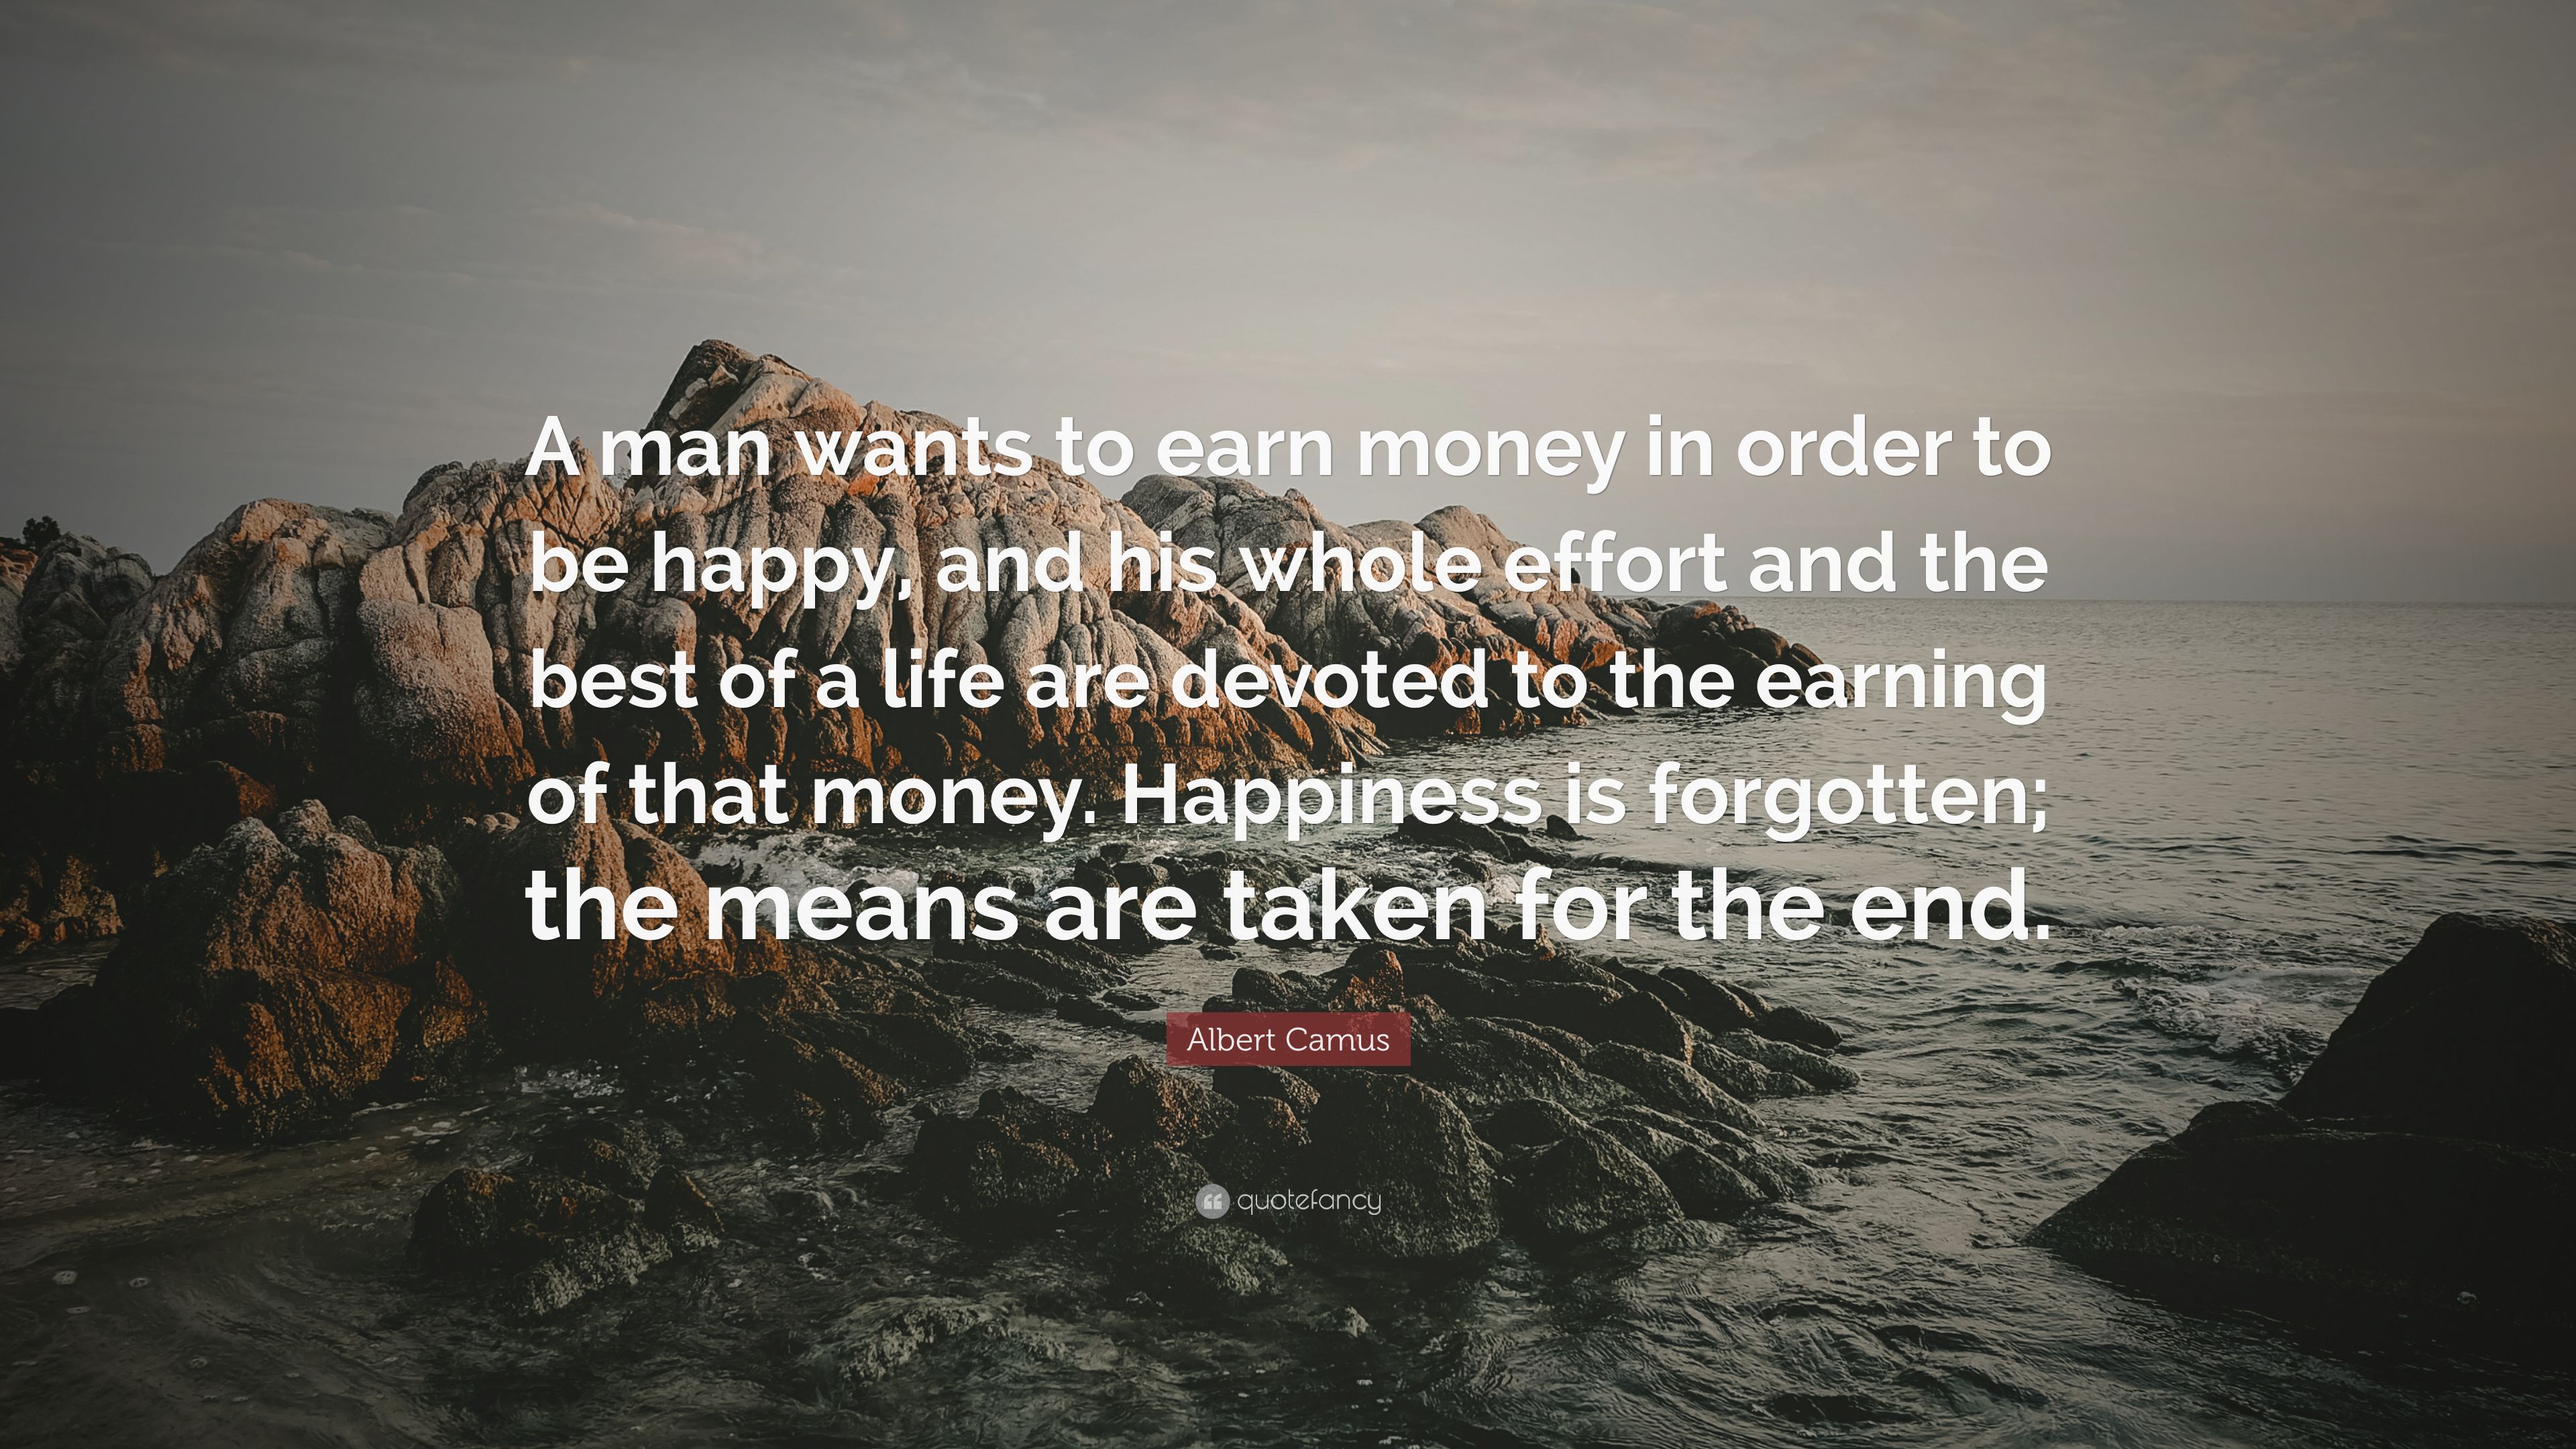 Albert Camus Quote: “A man wants to earn money in order to be happy, and his whole effort and the best of a life are devoted to the earning o.” (7 wallpaper)